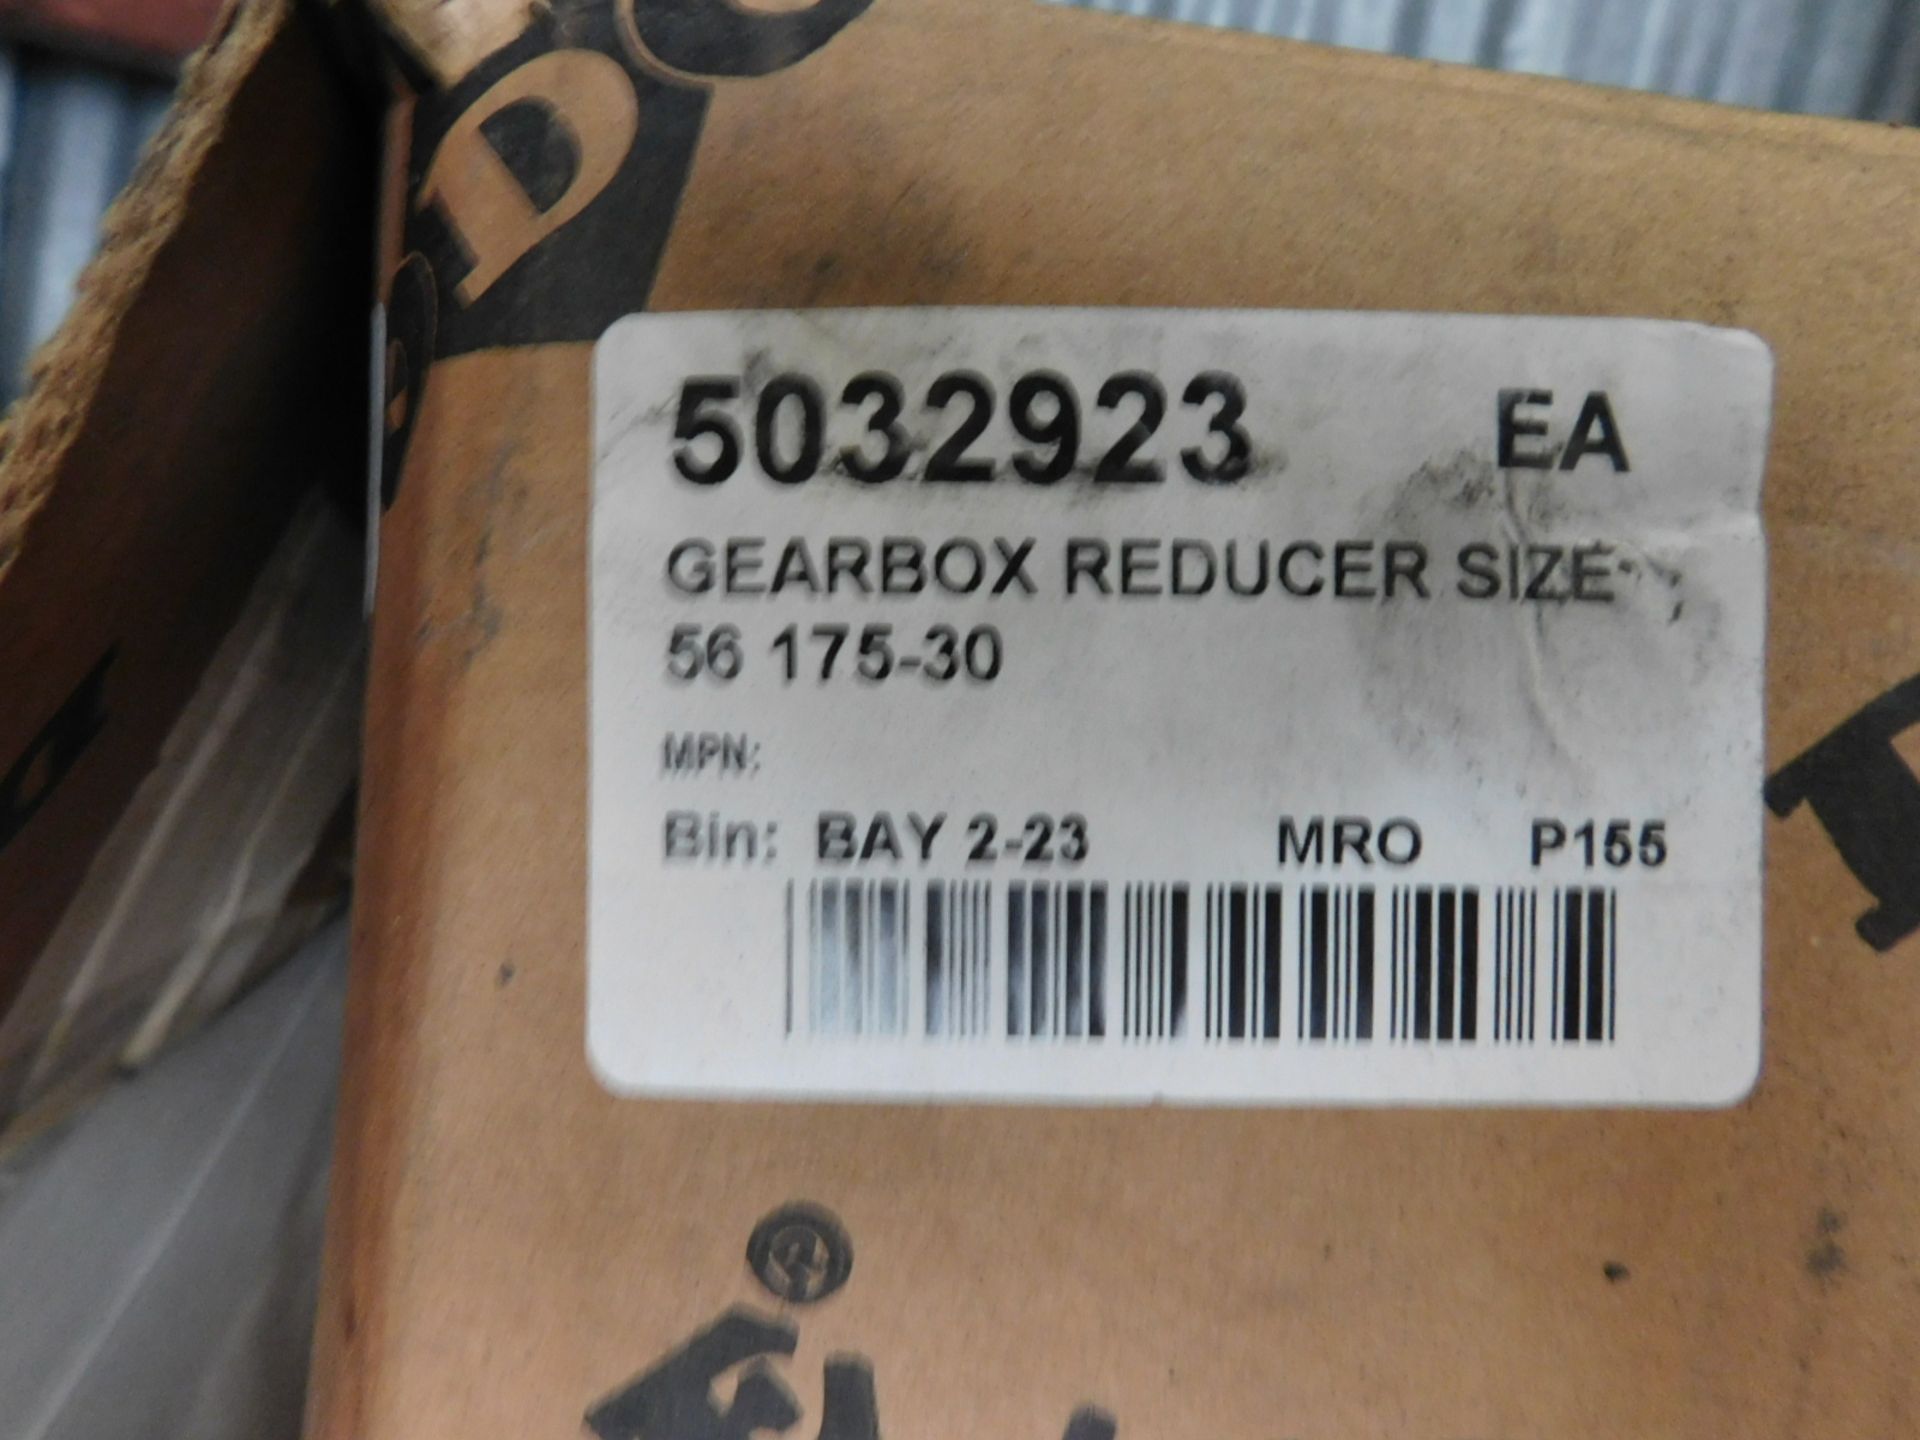 LOT/ (2) DODGE GEARBOX REDUCERS, SIZE 56 175-30 (DELAYED PICKUP - FEBRUARY 15, 2021) - Image 3 of 4